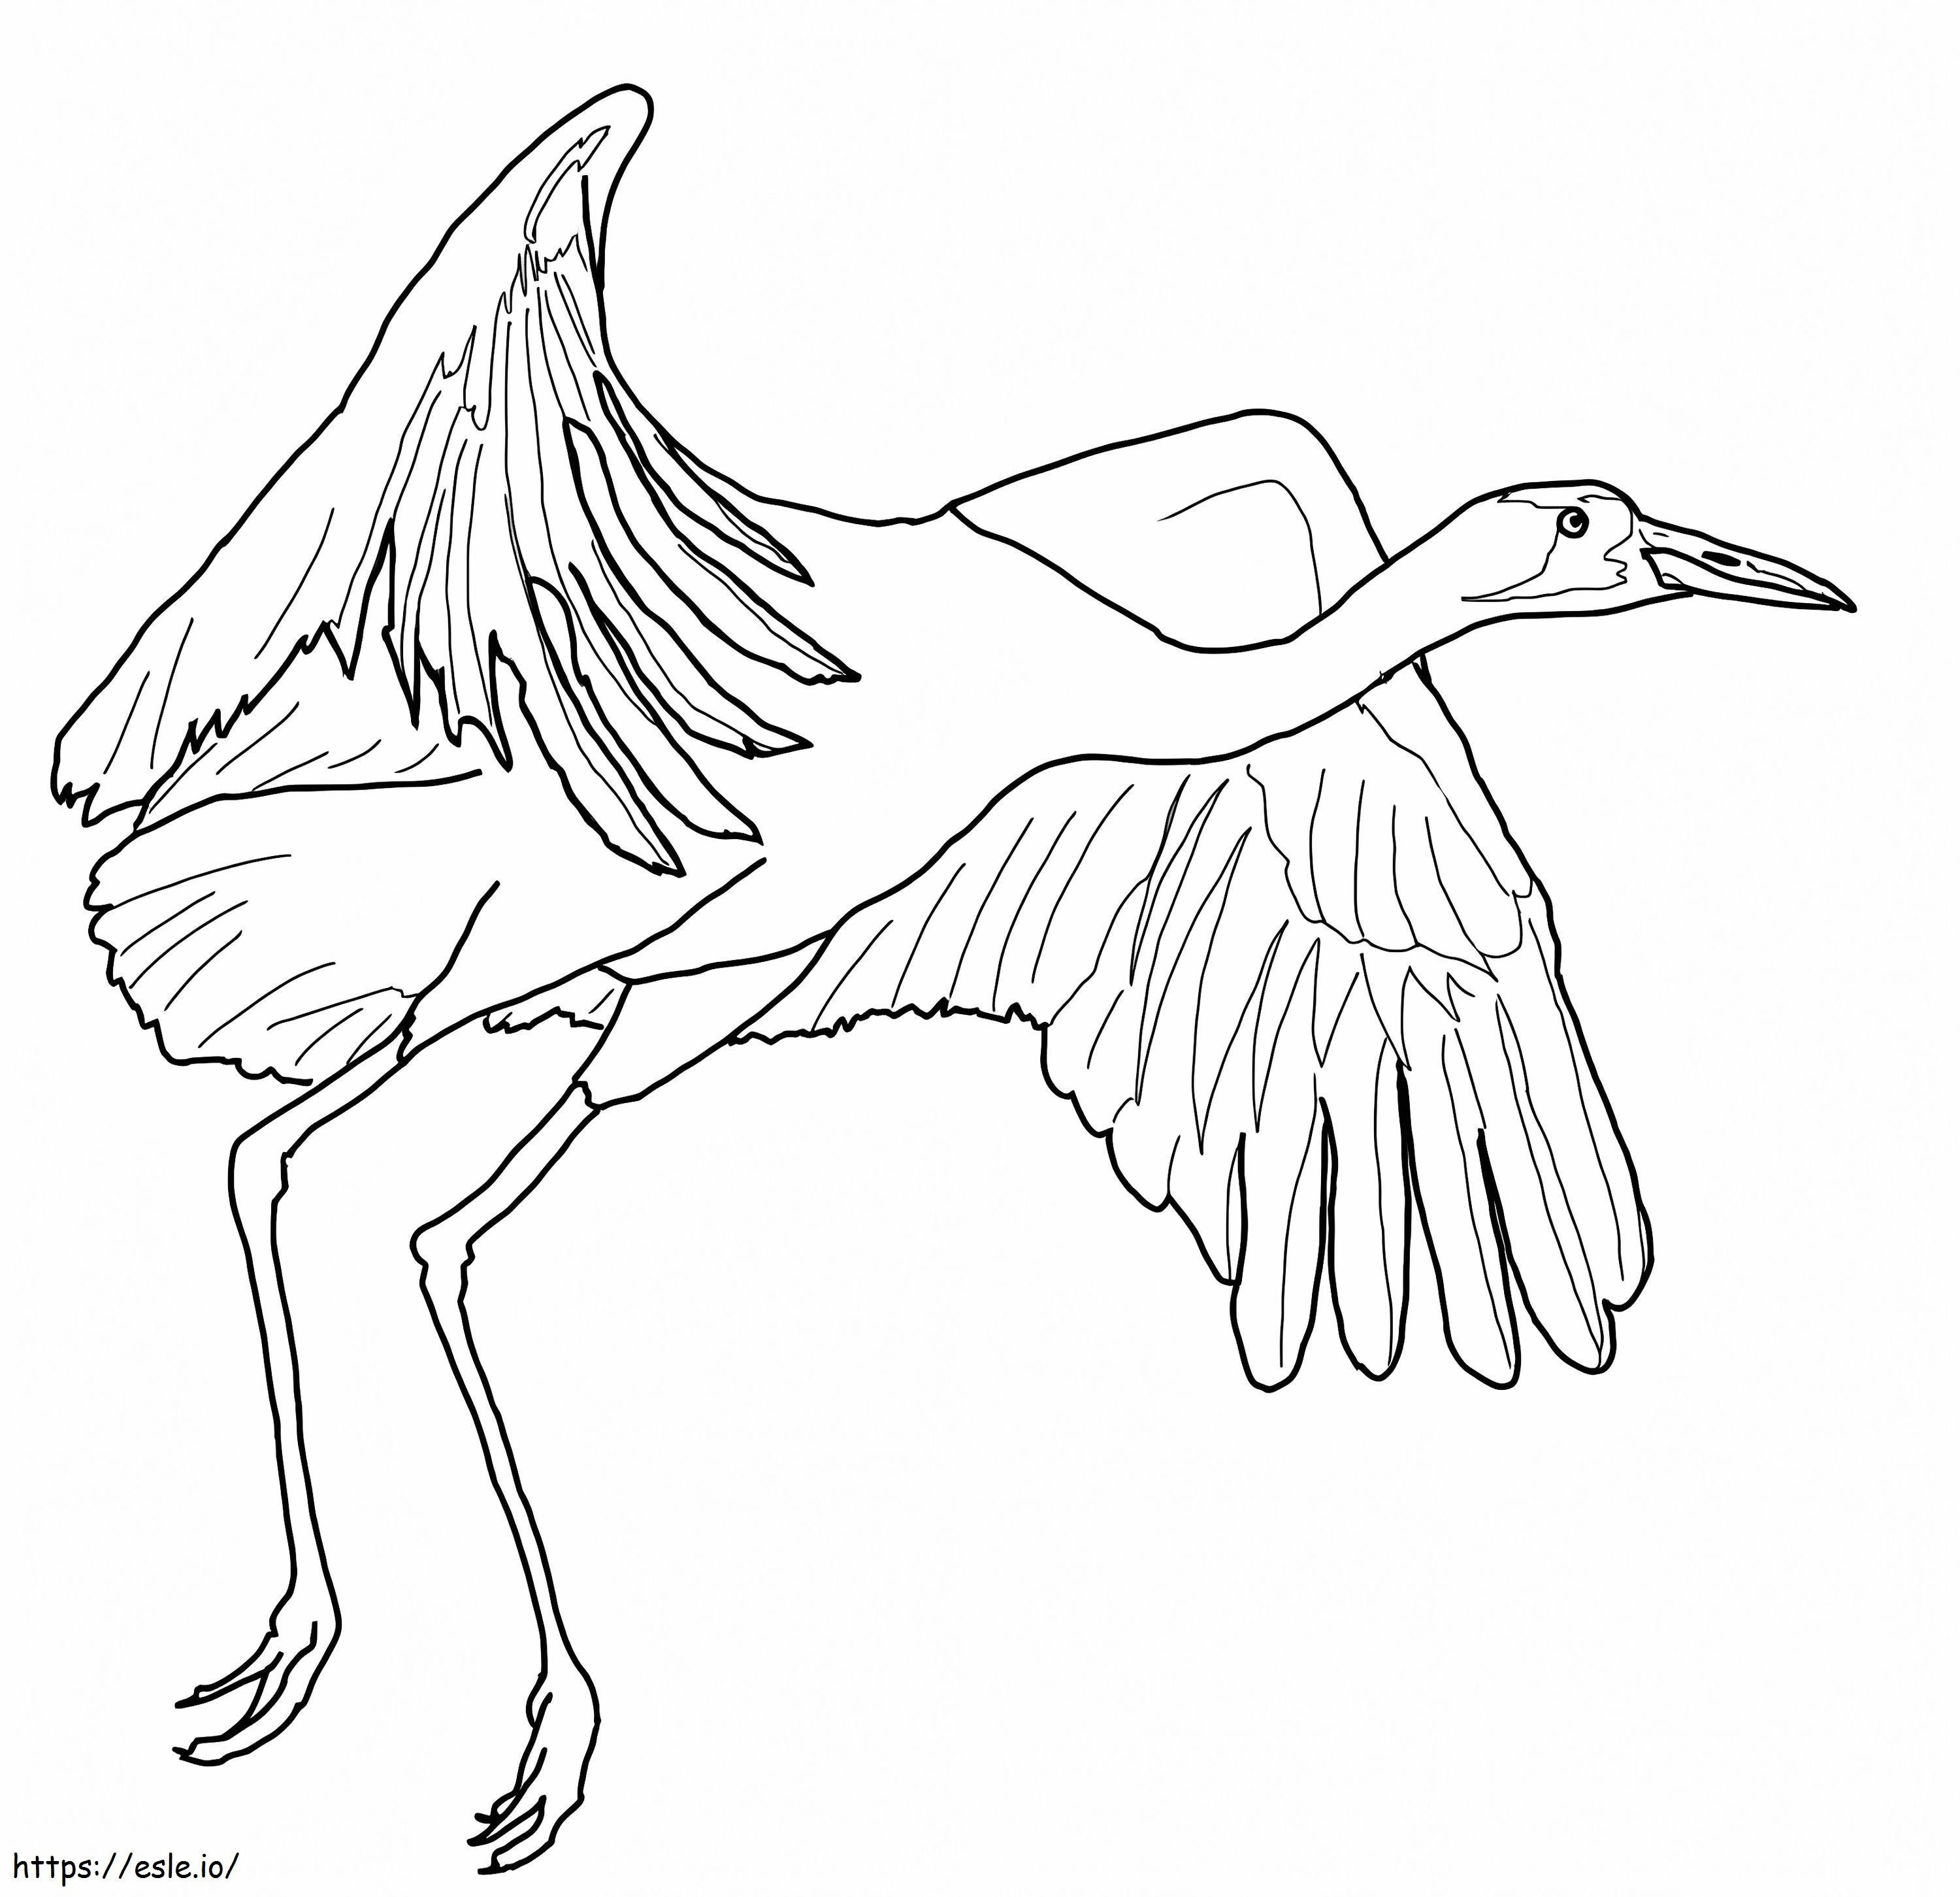 Whooping Crane 1 coloring page